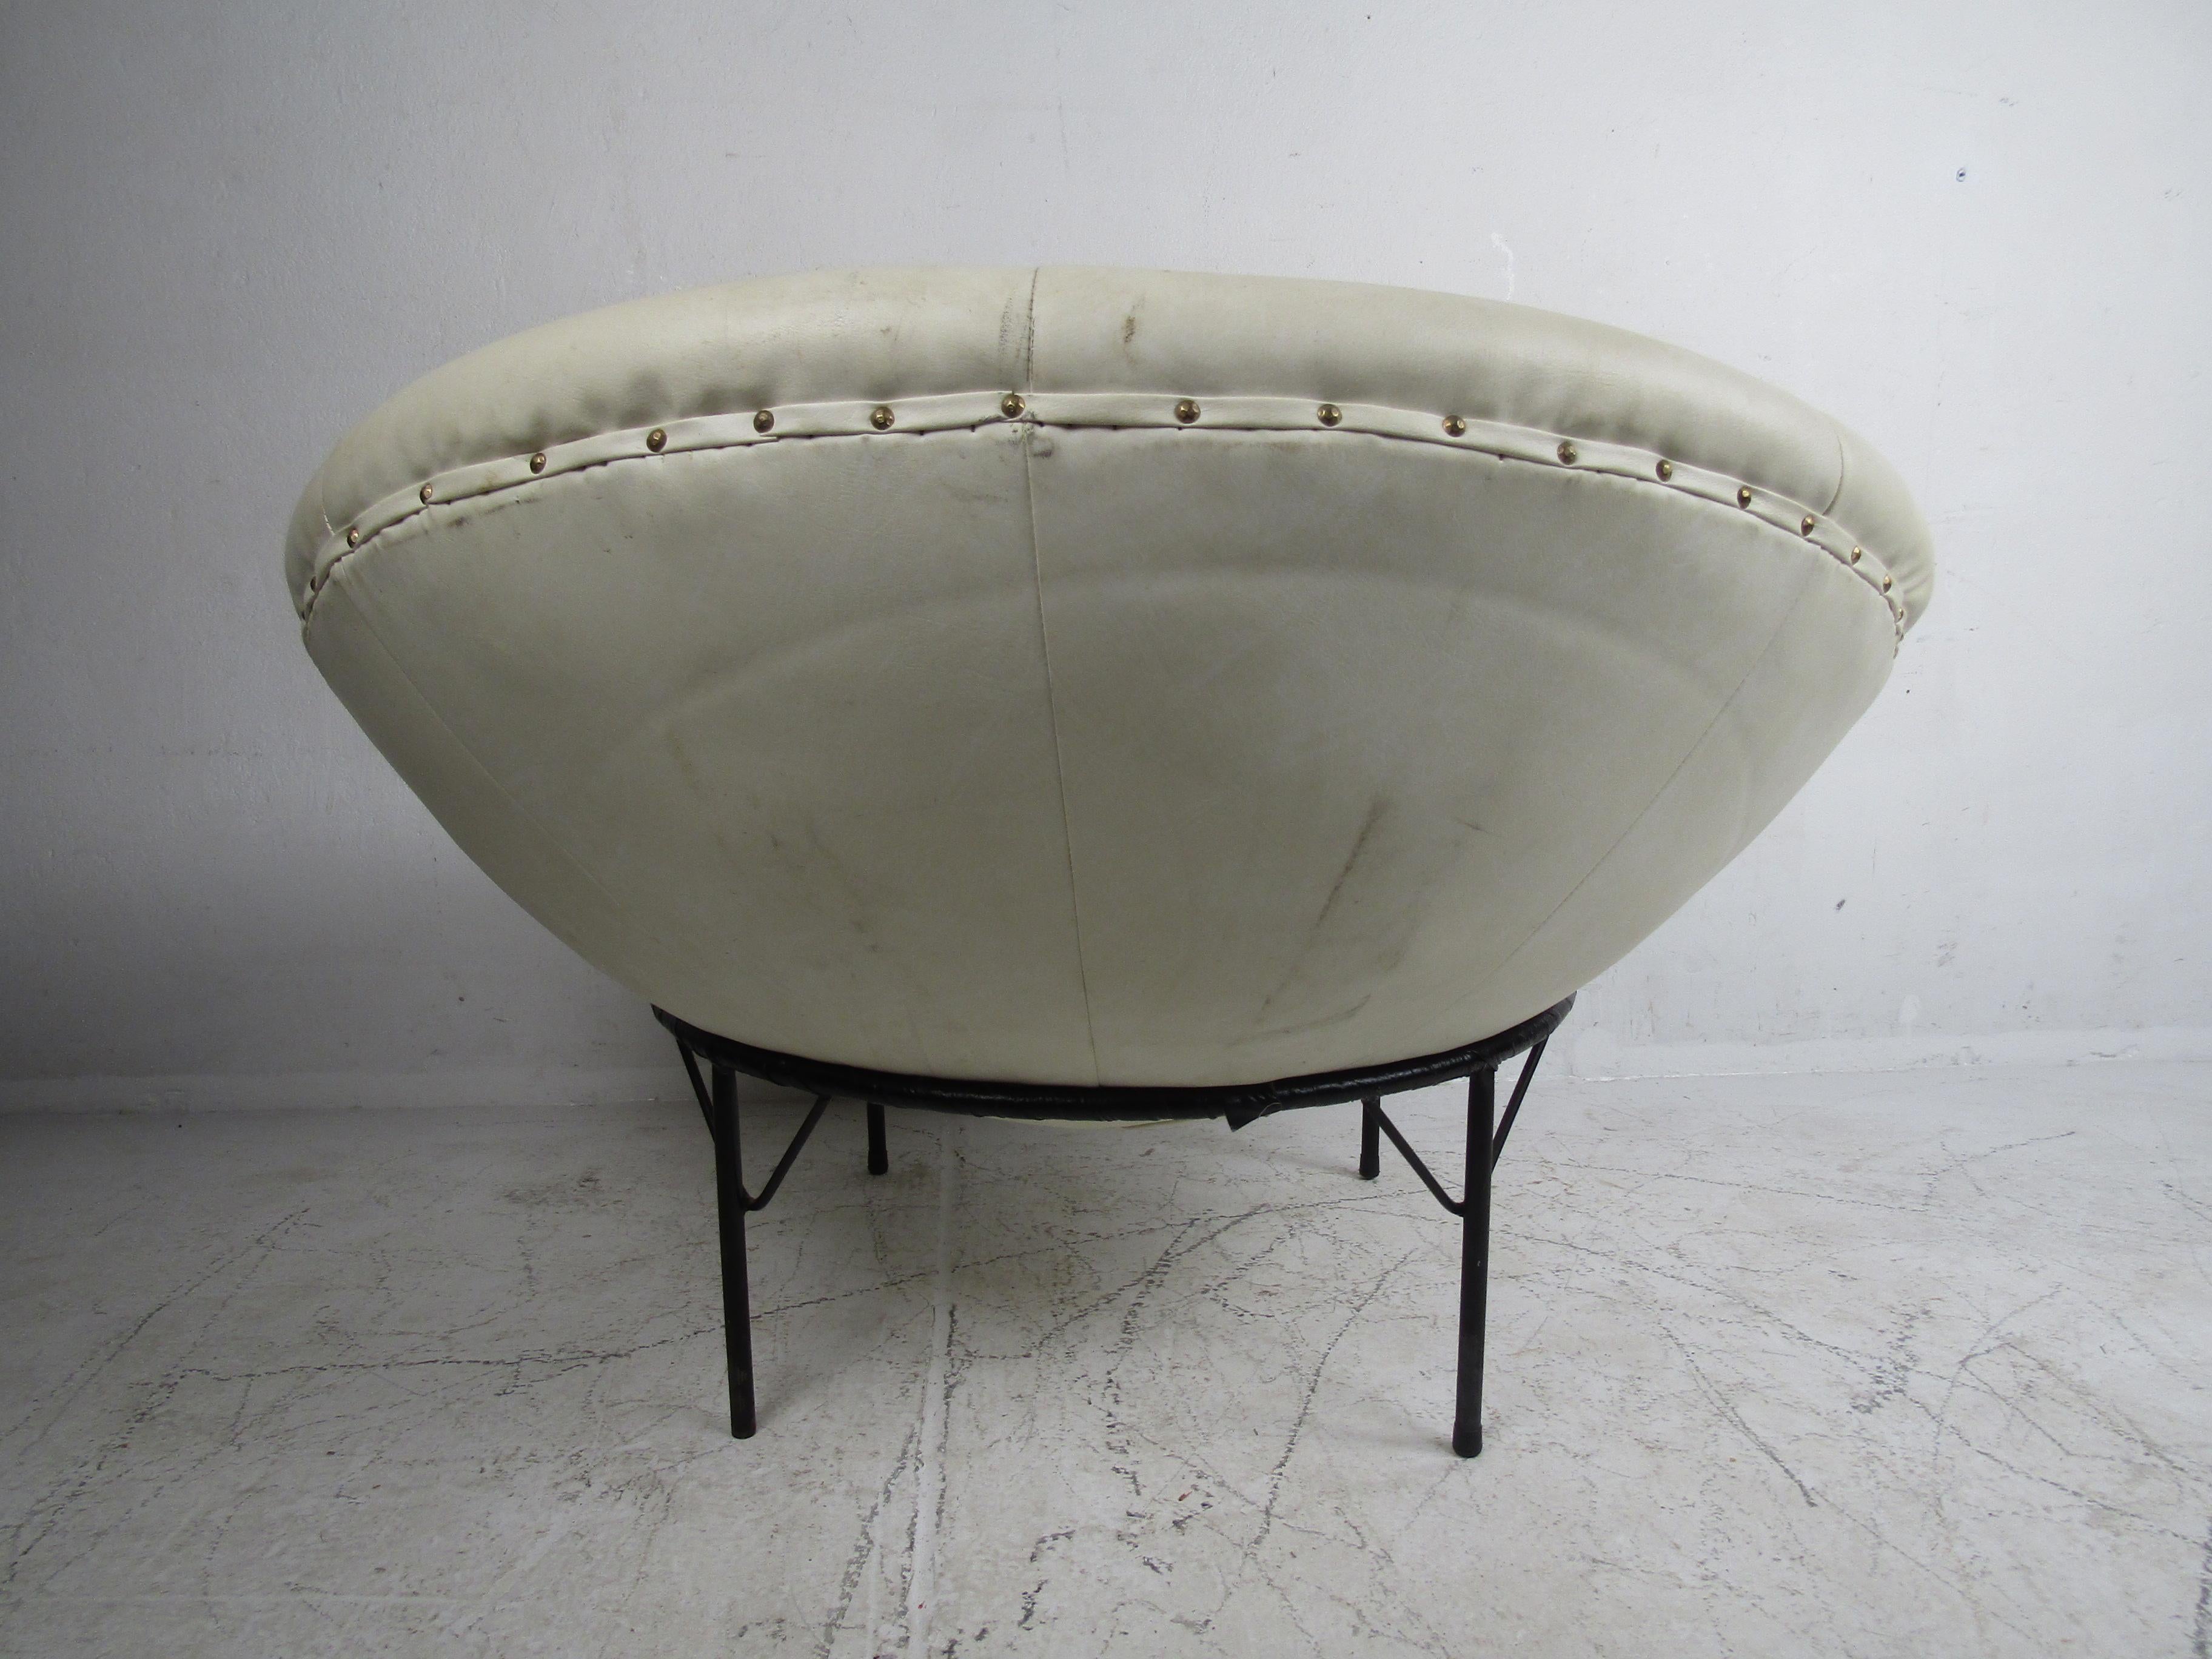 Unusual Mid-Century Modern Leather Bowl Chair In Good Condition For Sale In Brooklyn, NY